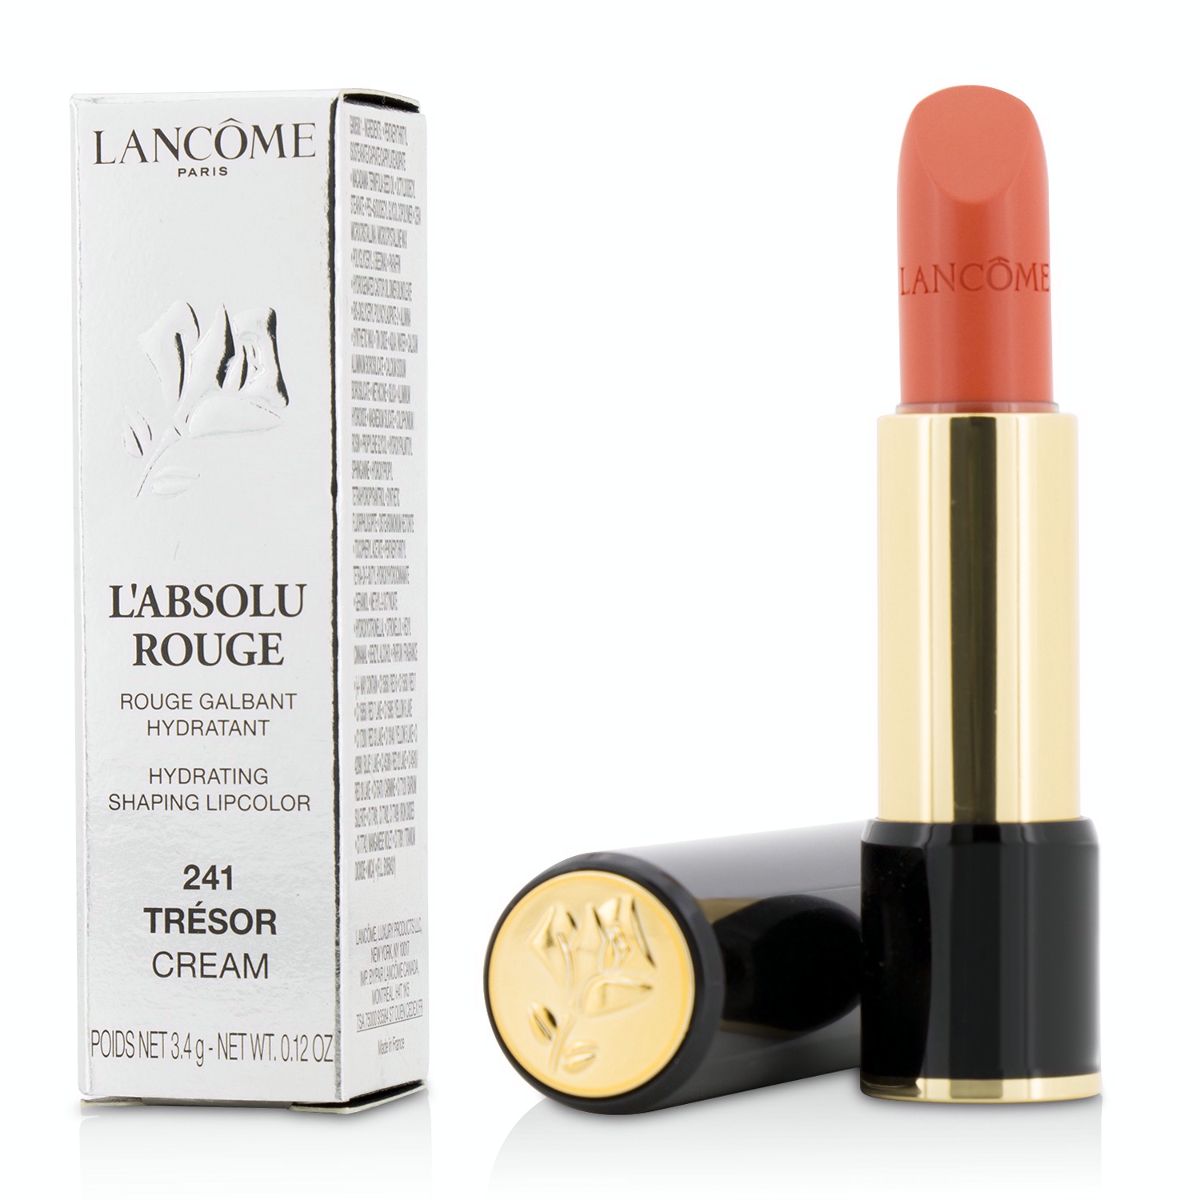 L Absolu Rouge Hydrating Shaping Lipcolor - # 241 Tresor (Cream) Lancome Image